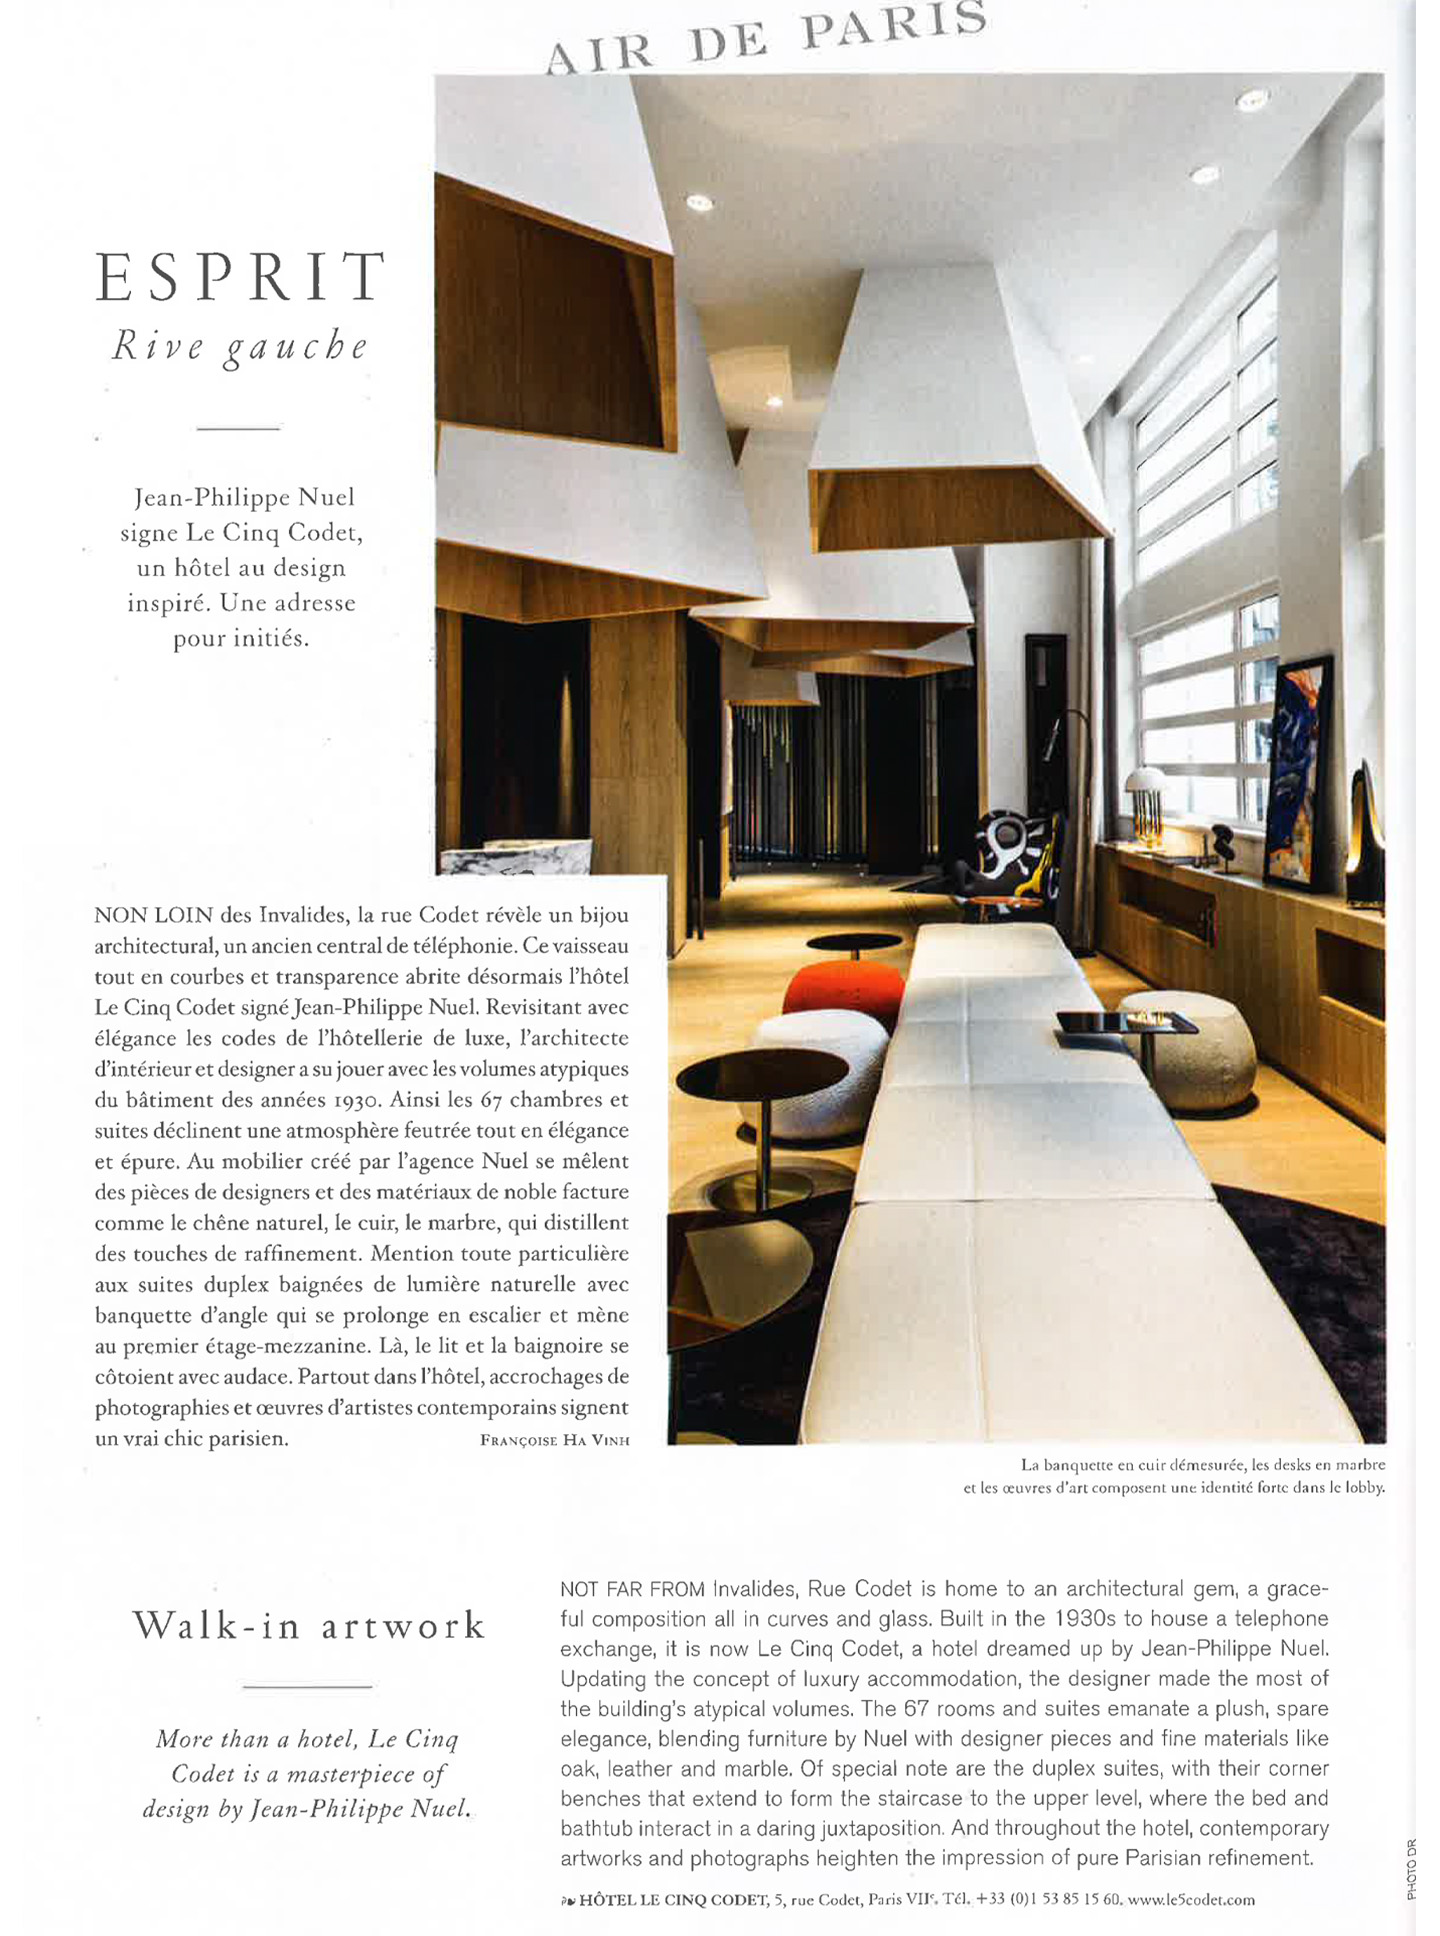 article on the hotel le cinq codet, a luxury hotel designed by the architecture studio jean-philippe nuel in the magazine air france madame